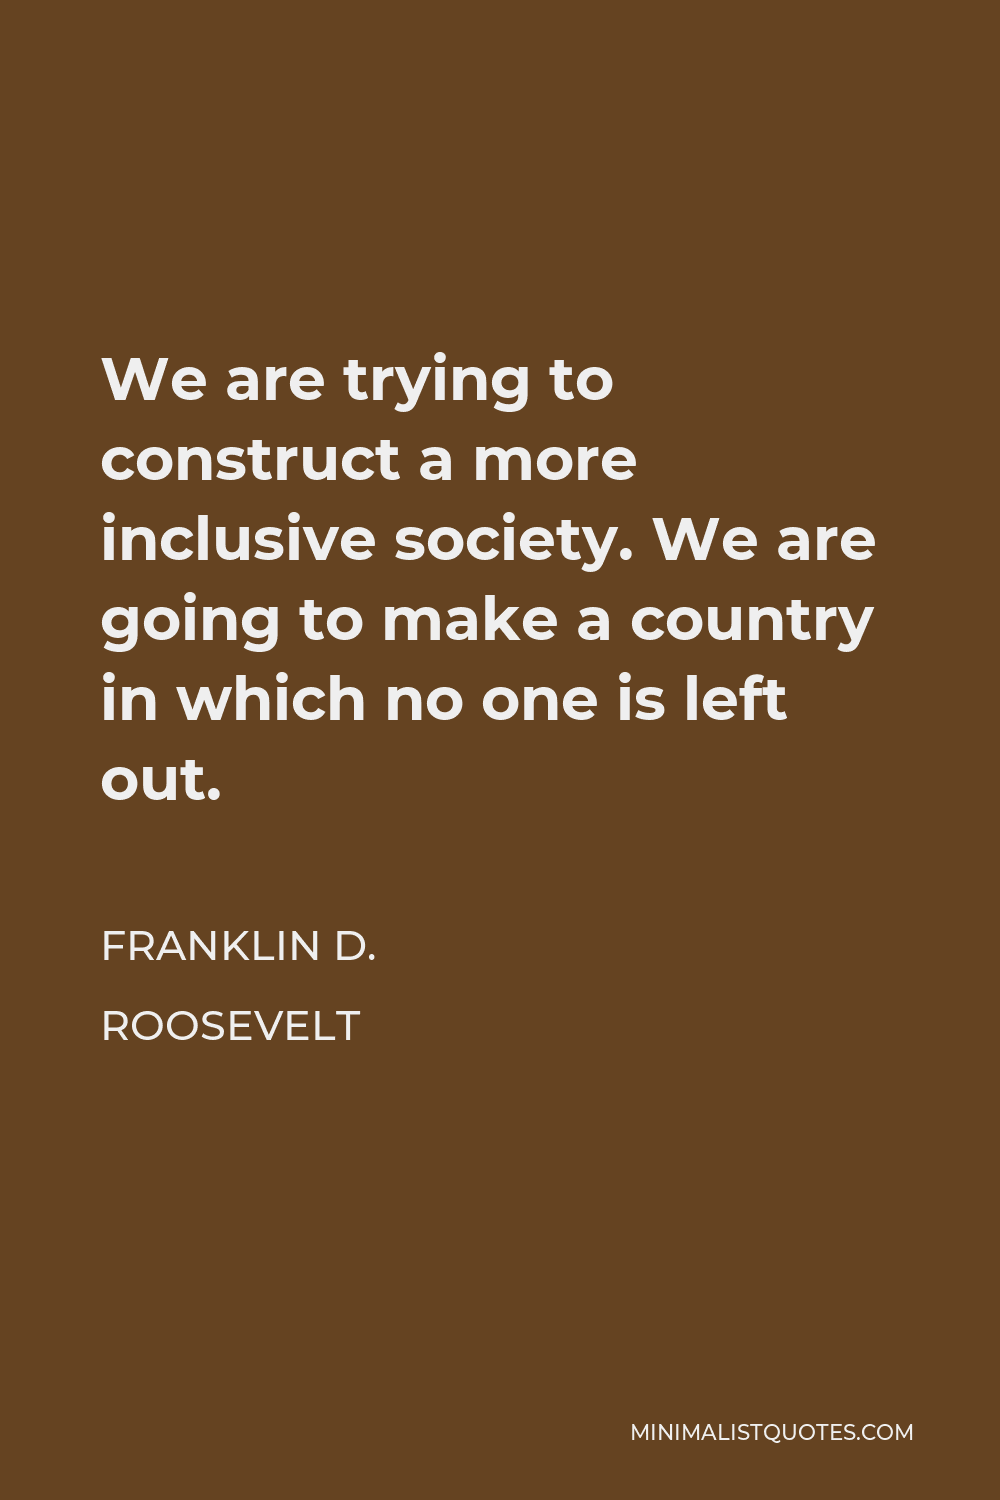 Franklin D. Roosevelt Quote - We are trying to construct a more inclusive society. We are going to make a country in which no one is left out.